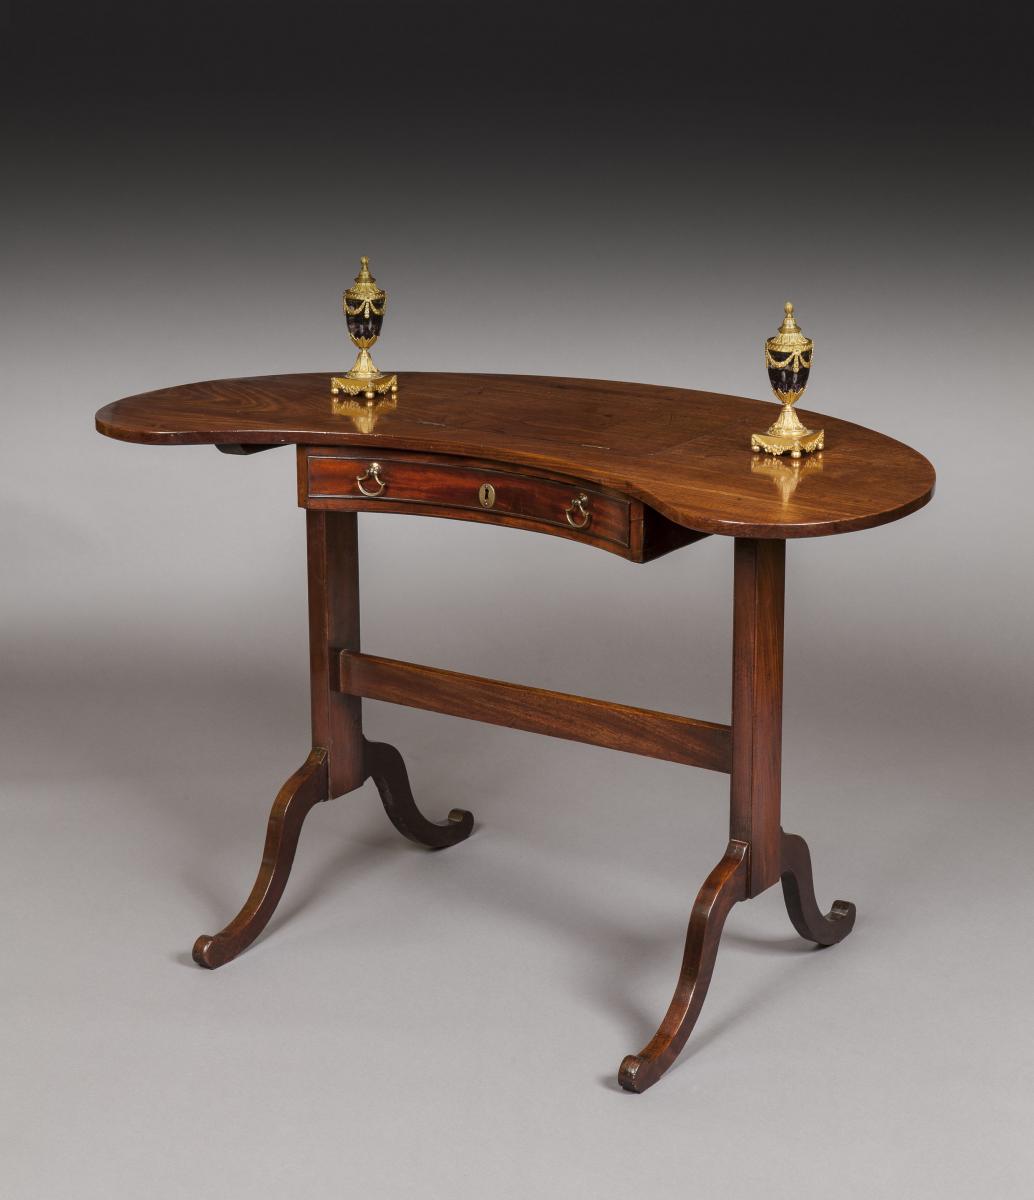 Thoma Chippendale  England, Circa 1775  Unusual, English 18th Century Chippendale Period Kidney Shape Writing Table